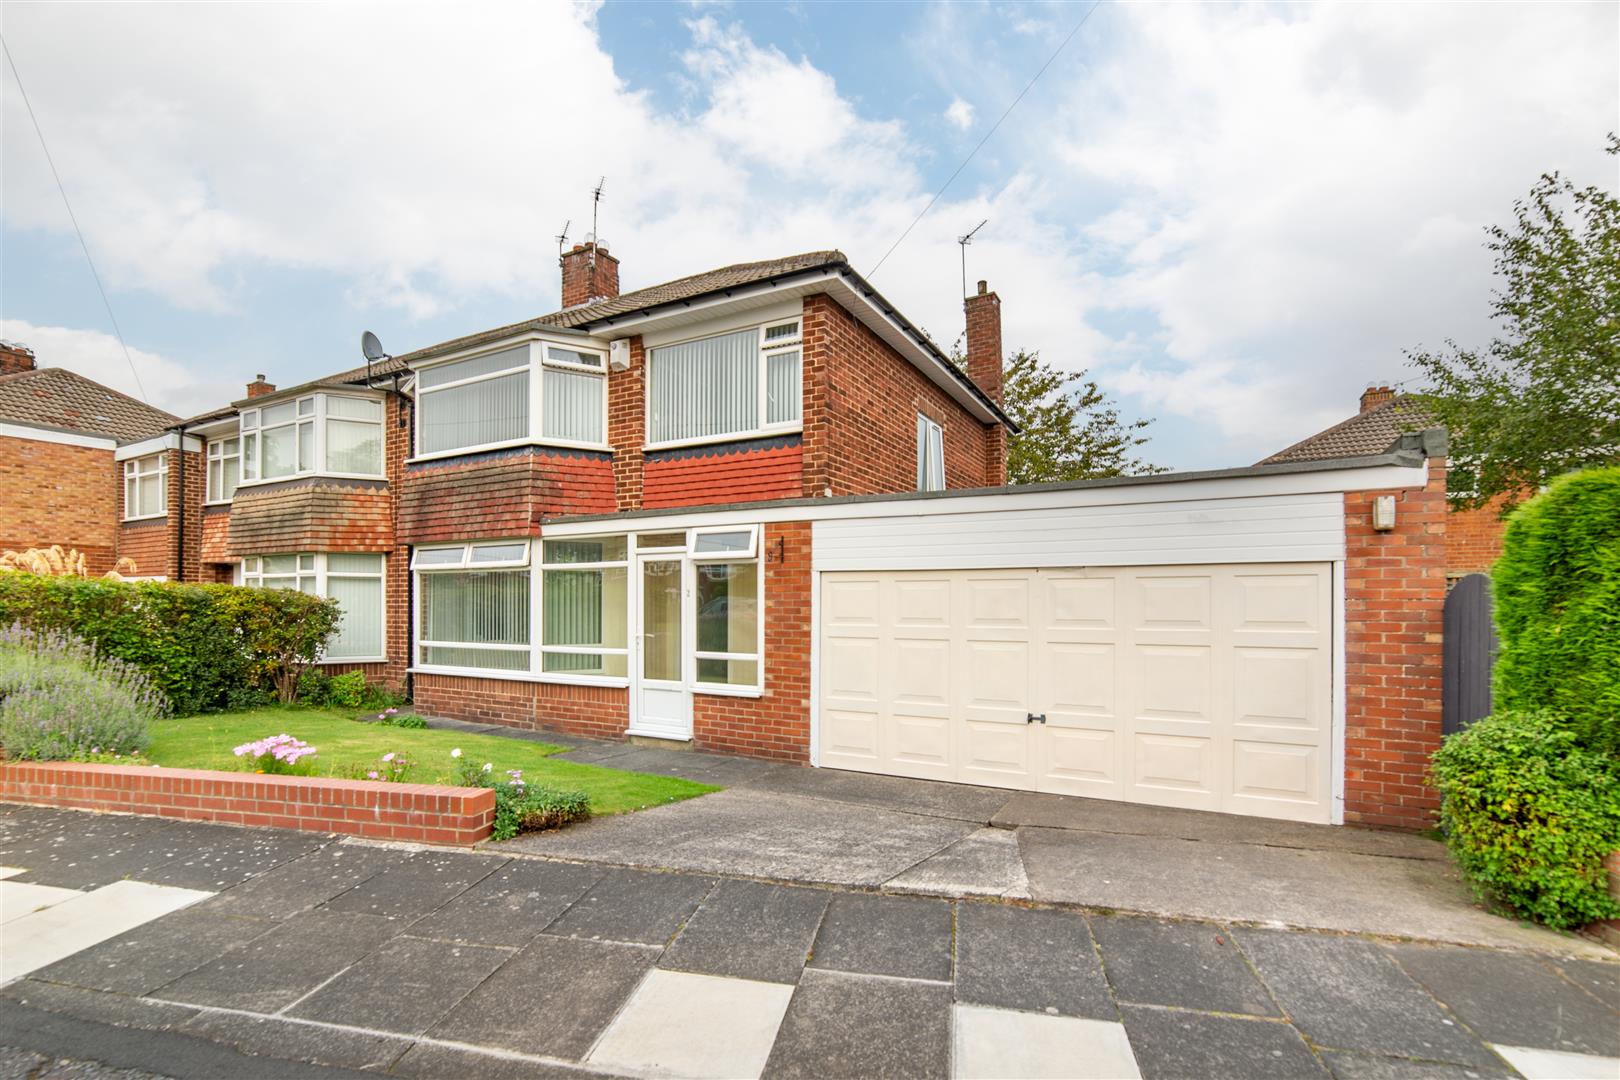 3 bed semi-detached house for sale in Kilnshaw Place, Melton Park  - Property Image 1